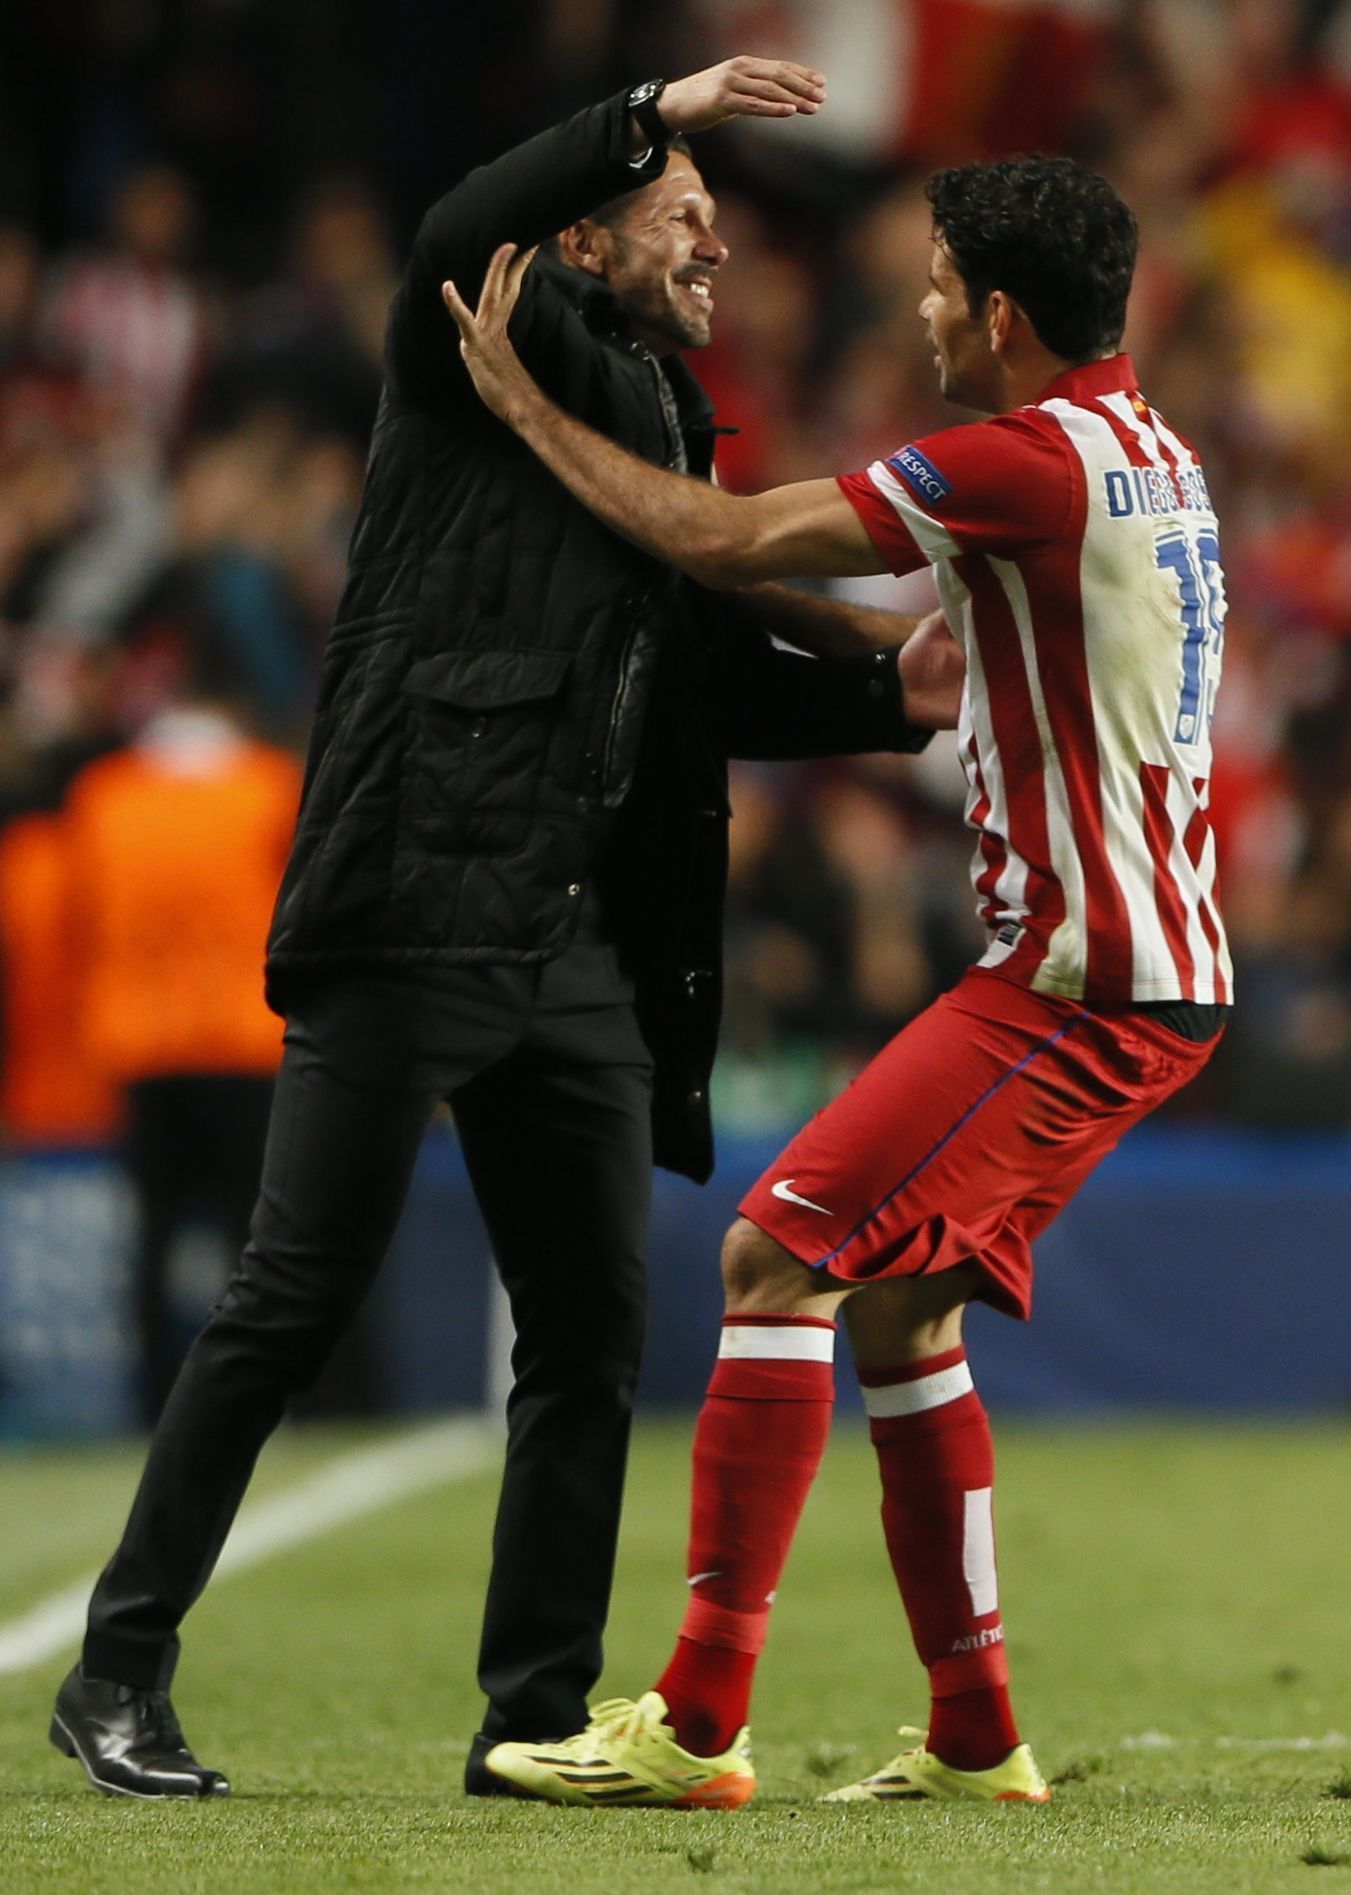 Atletico Madrid's Lopez celebrates with coach Simeone after scoring penalty against Chelsea in Champion's League semi-final second leg soccer match in London